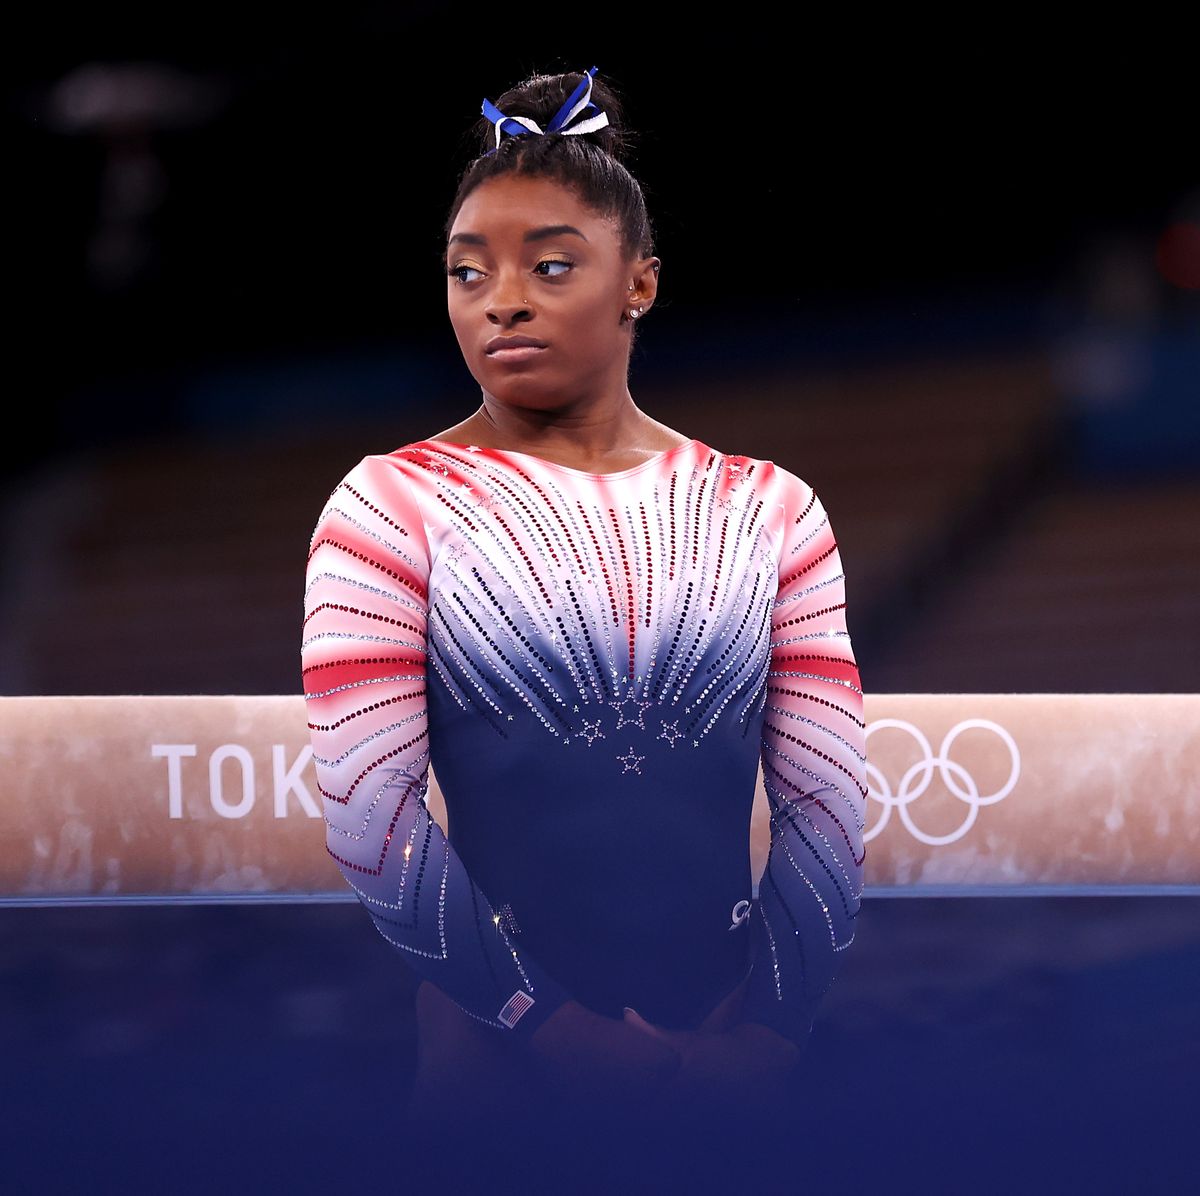 Who Is Simone Biles? What to Know About the Olympic Gymnast